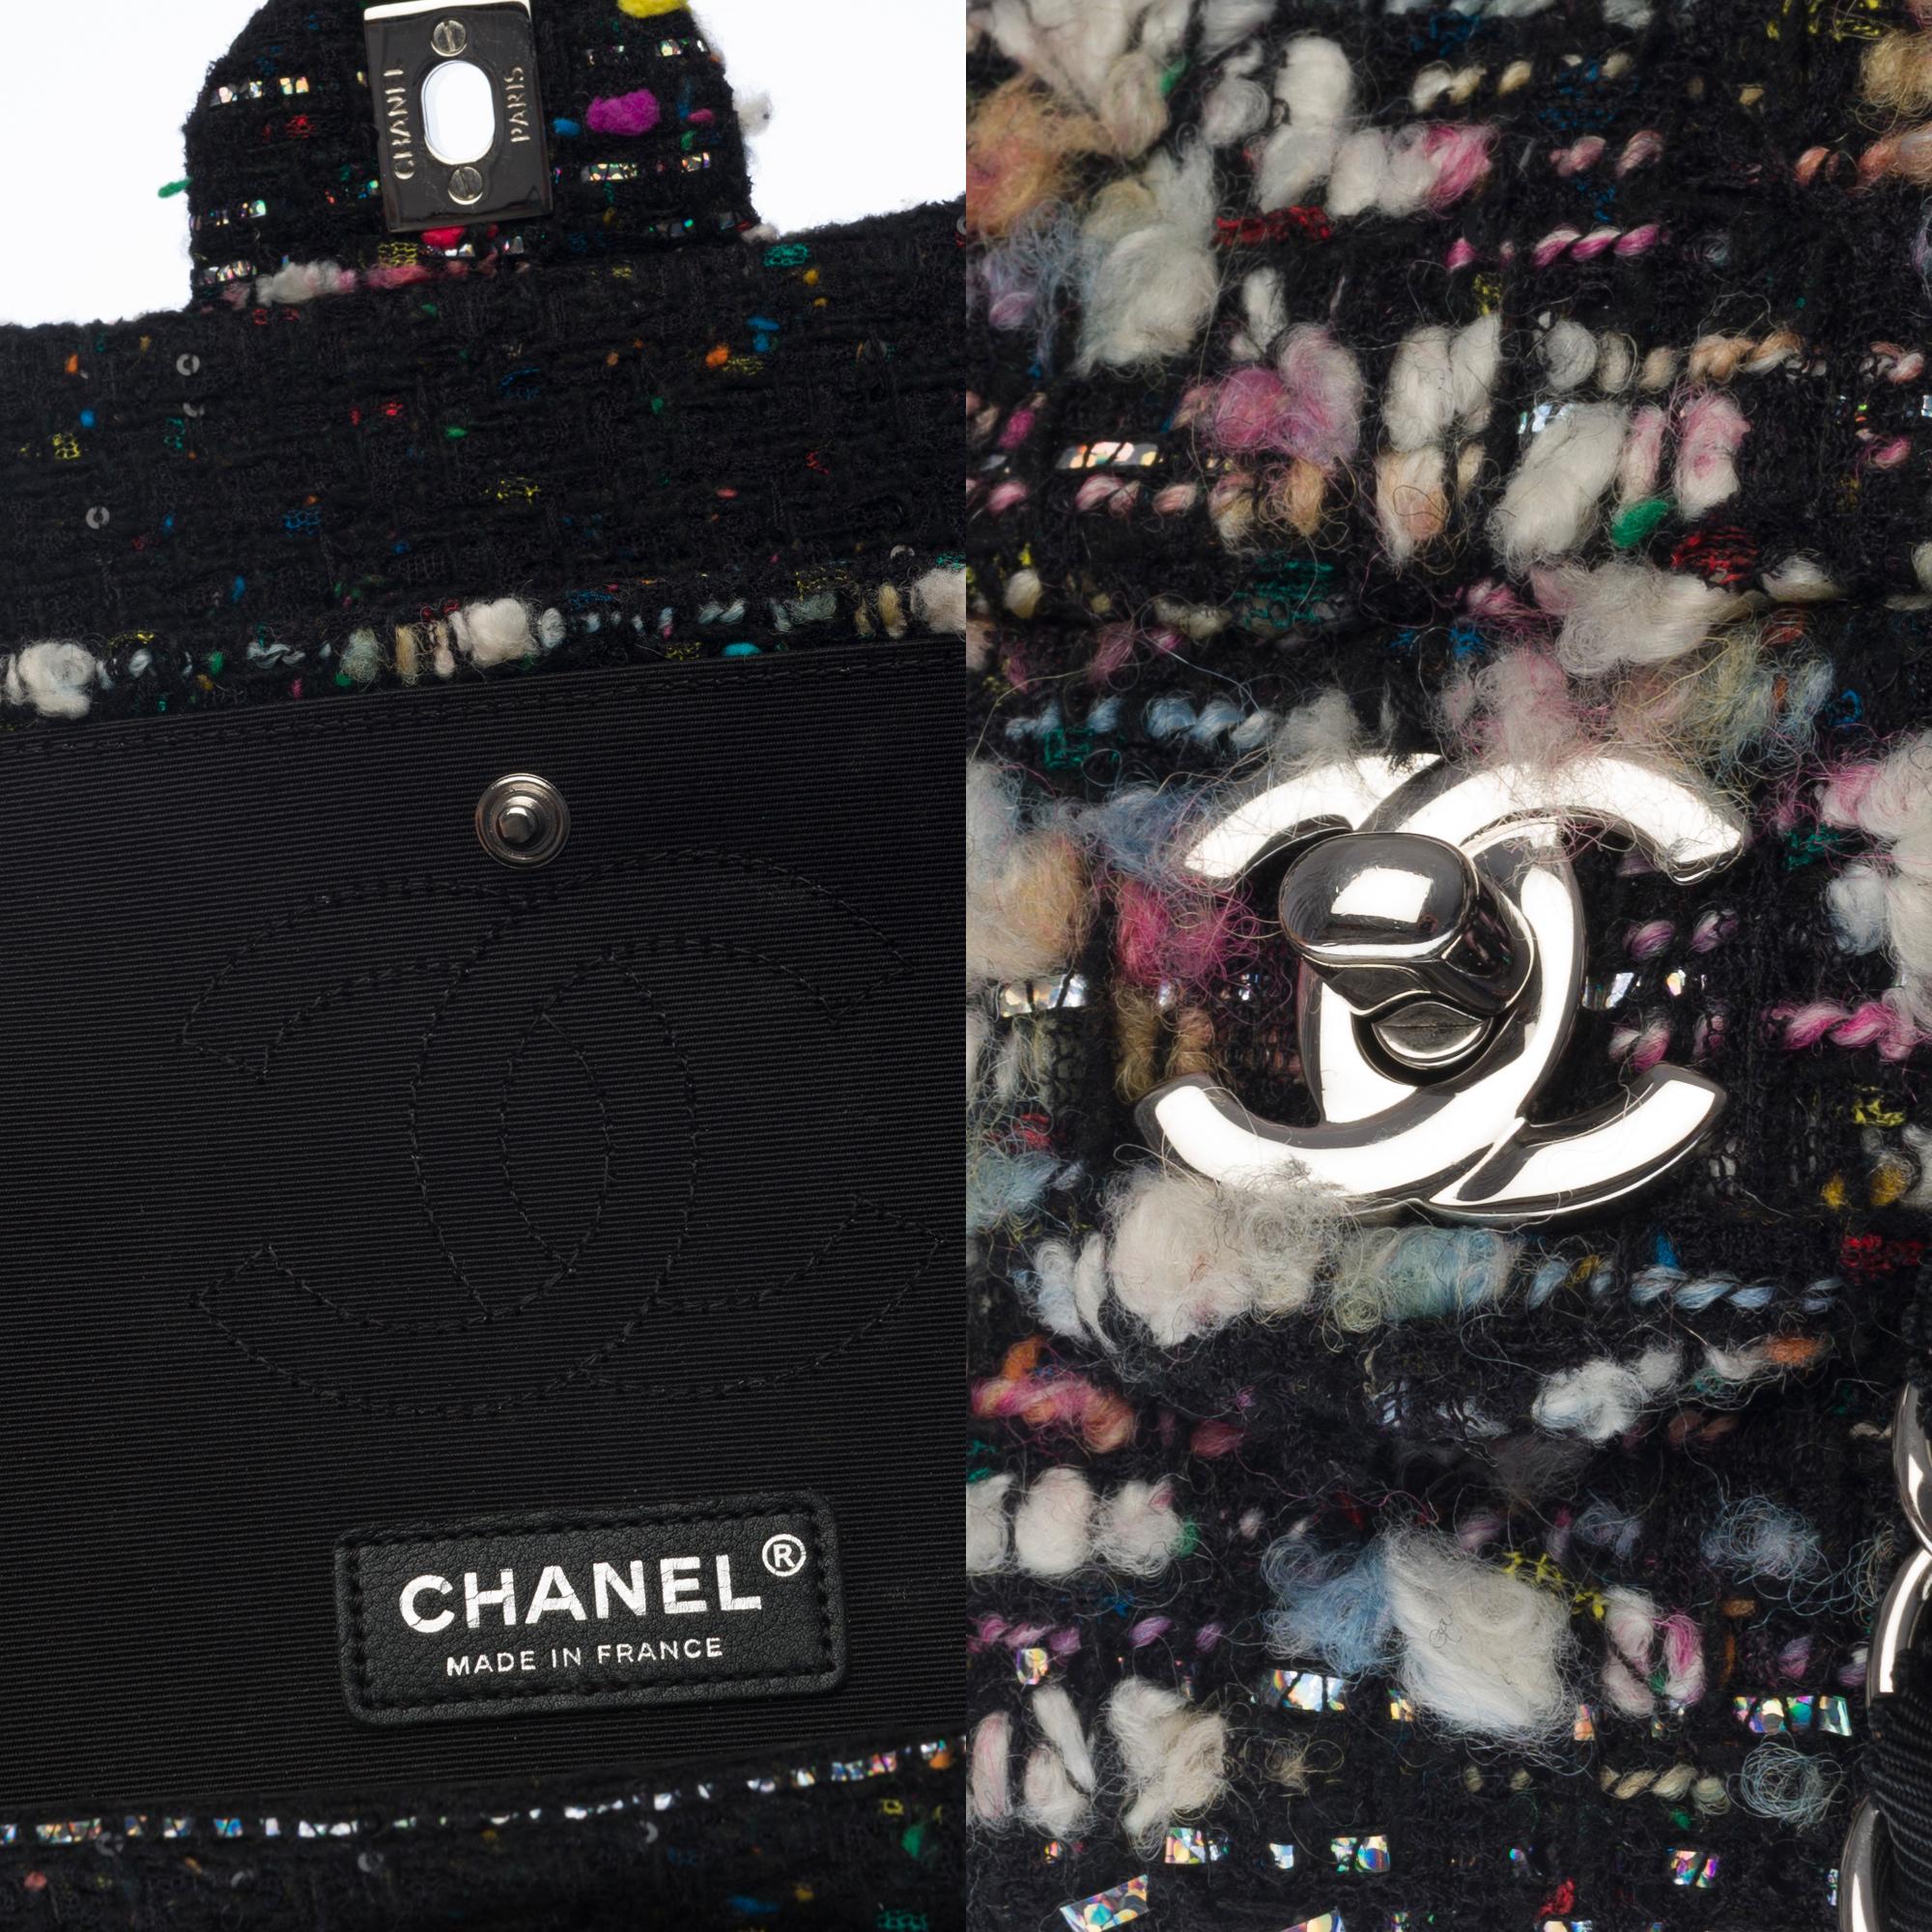 Limited Edition Chanel Timeless Shoulder bag in Multicolor Tweed with SHW 1